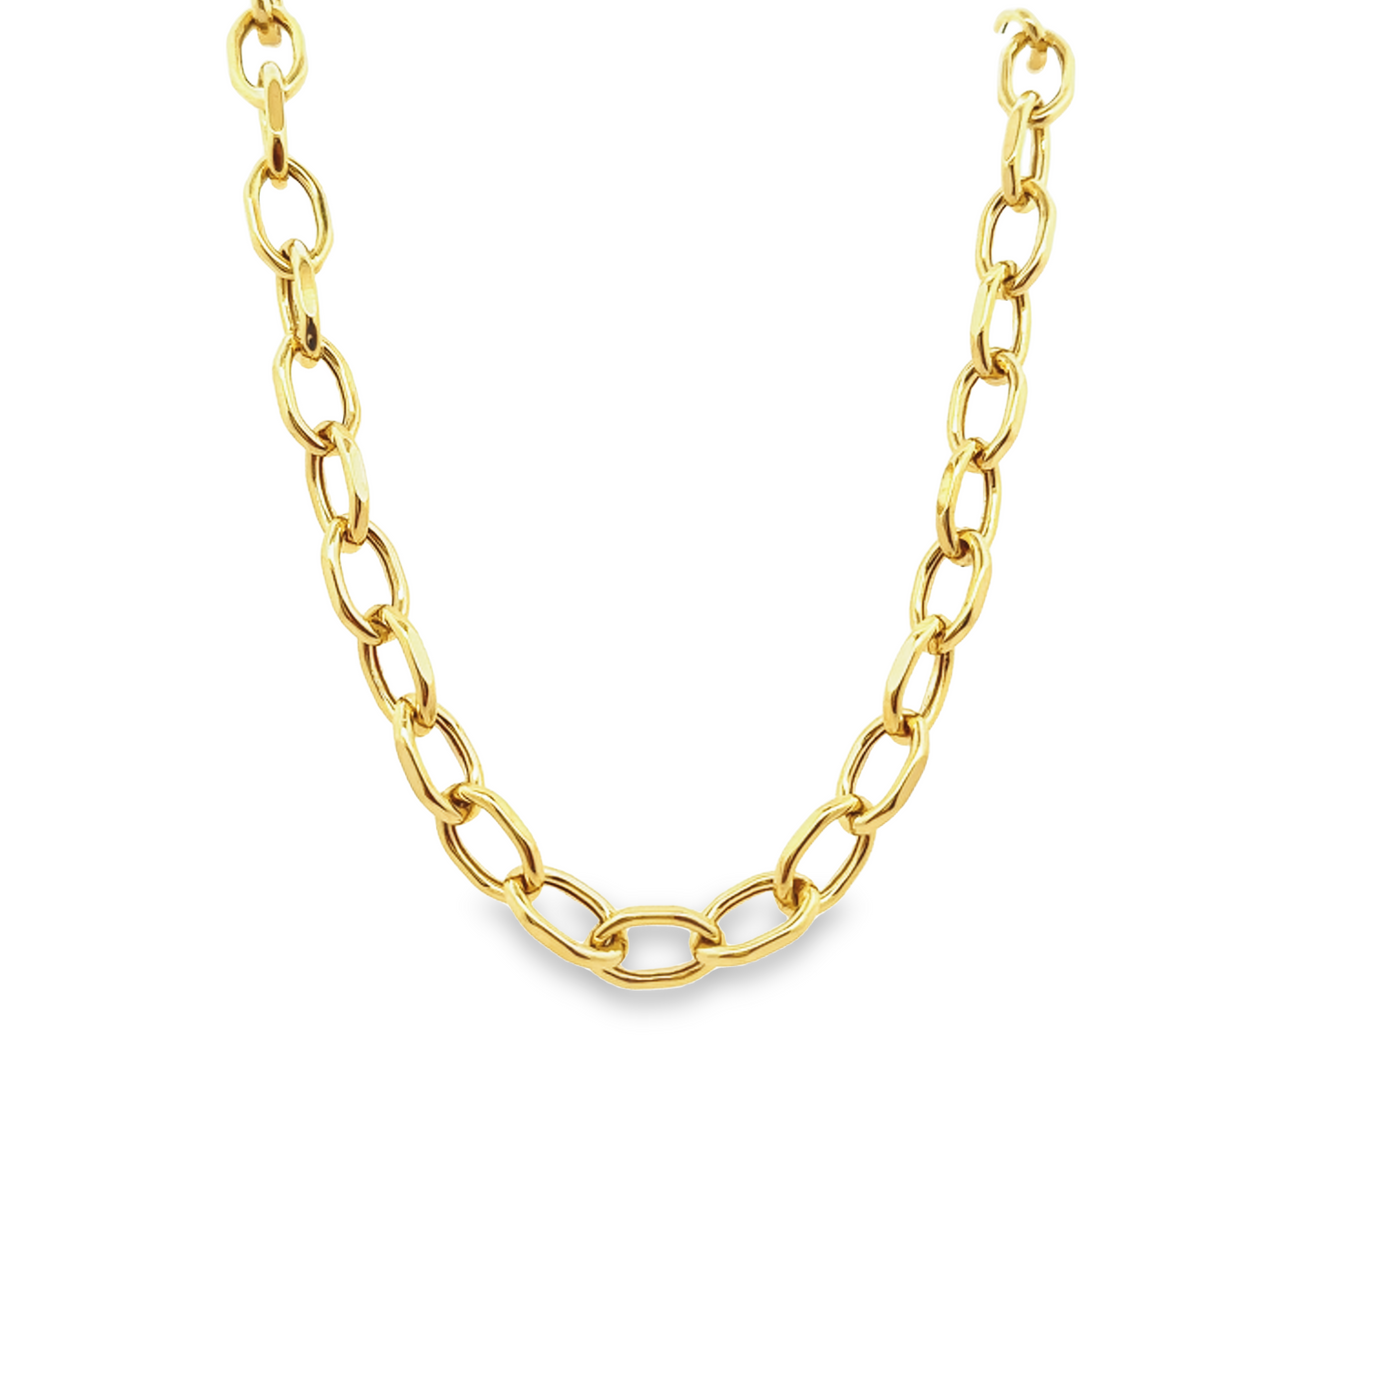 10 Karat Yellow Gold Oval Link Necklace